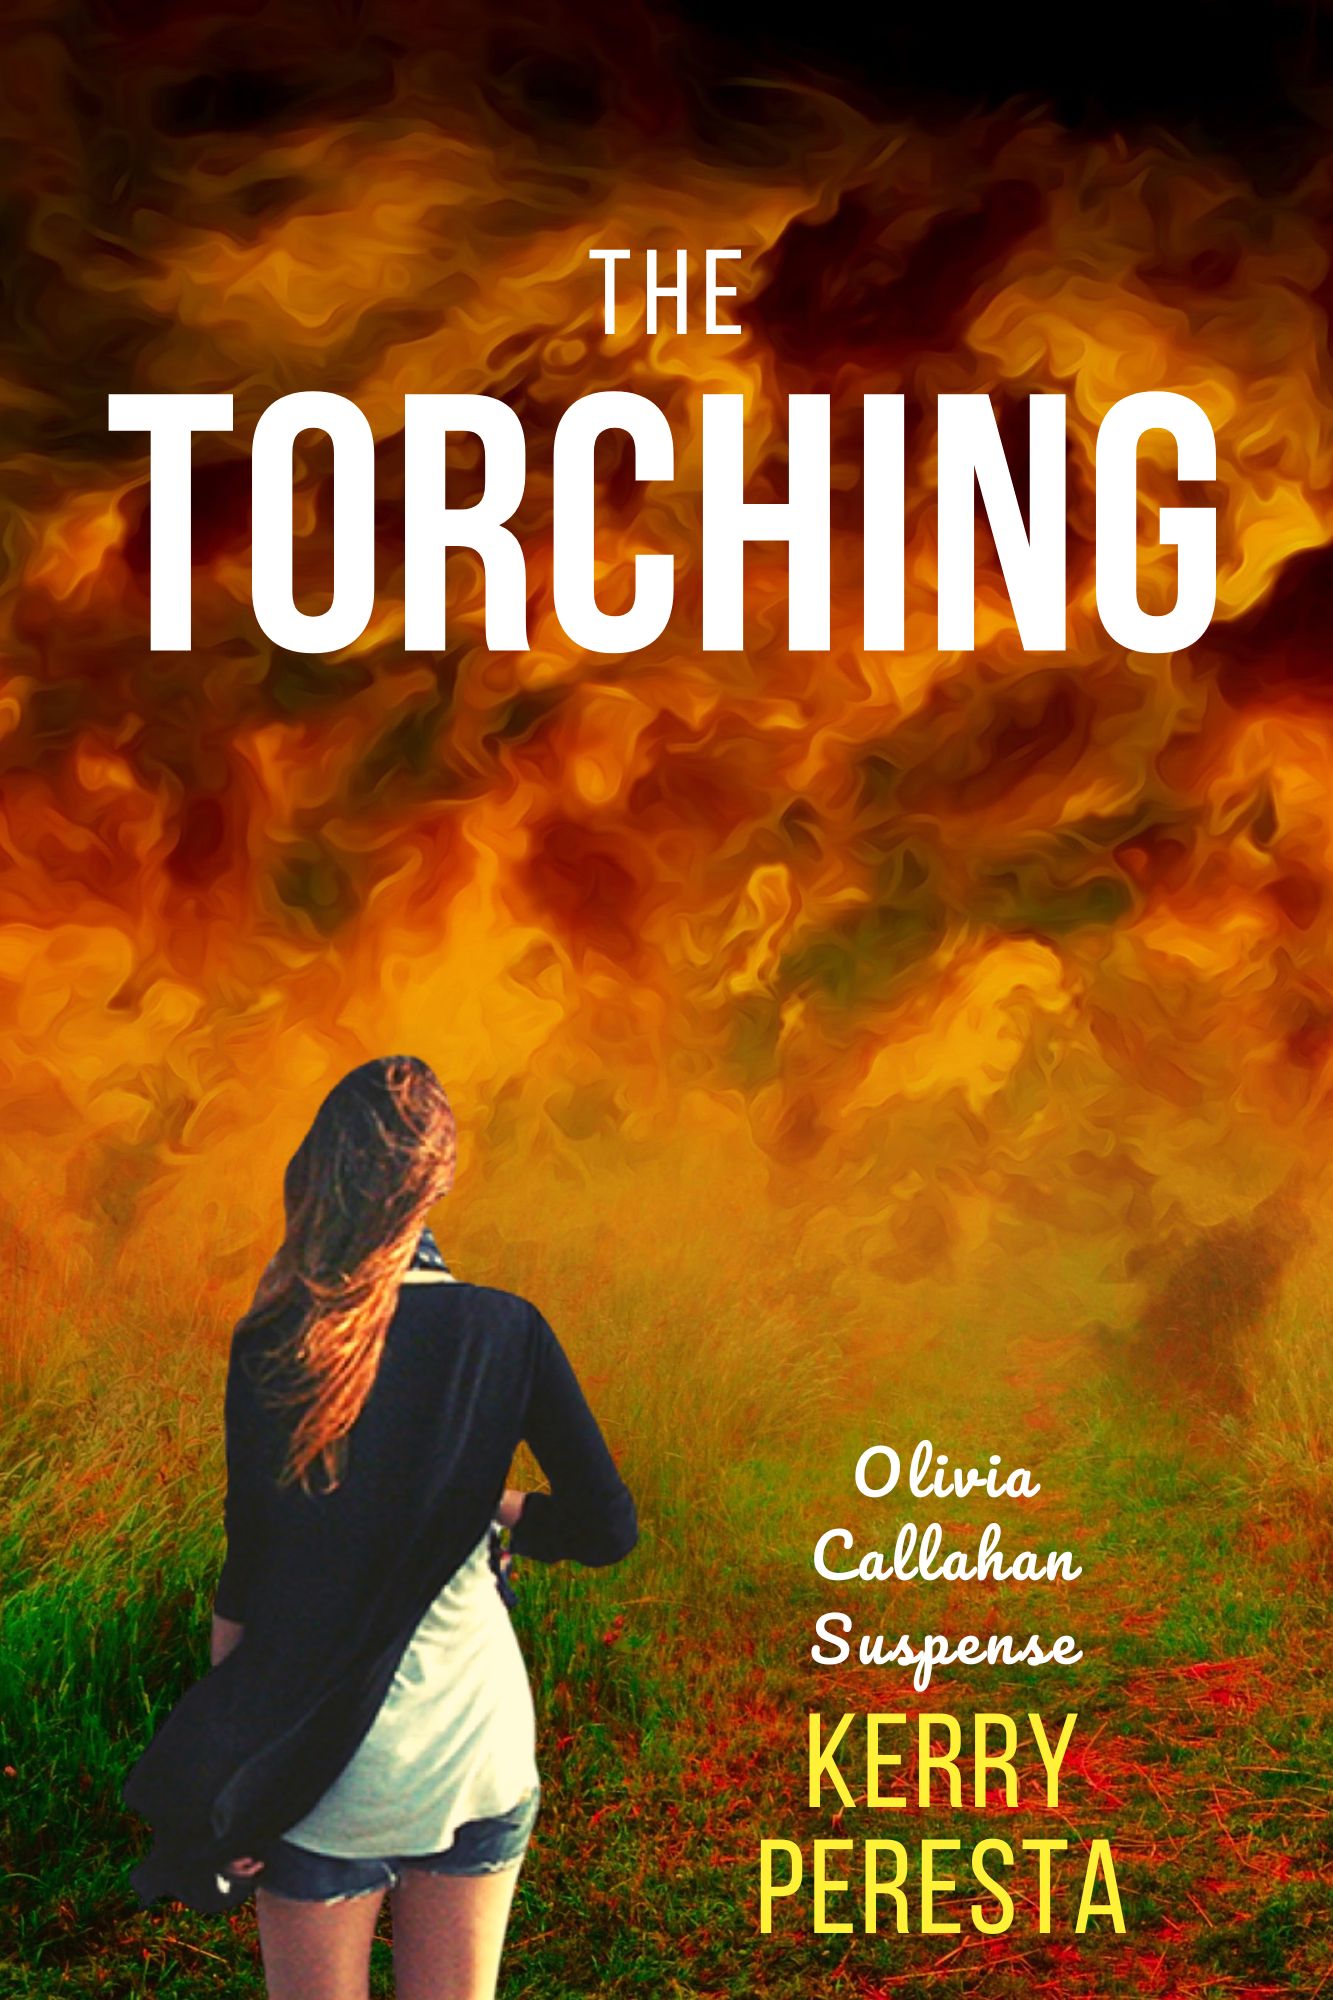 The Torching by Kerry Peresta by James McCrone